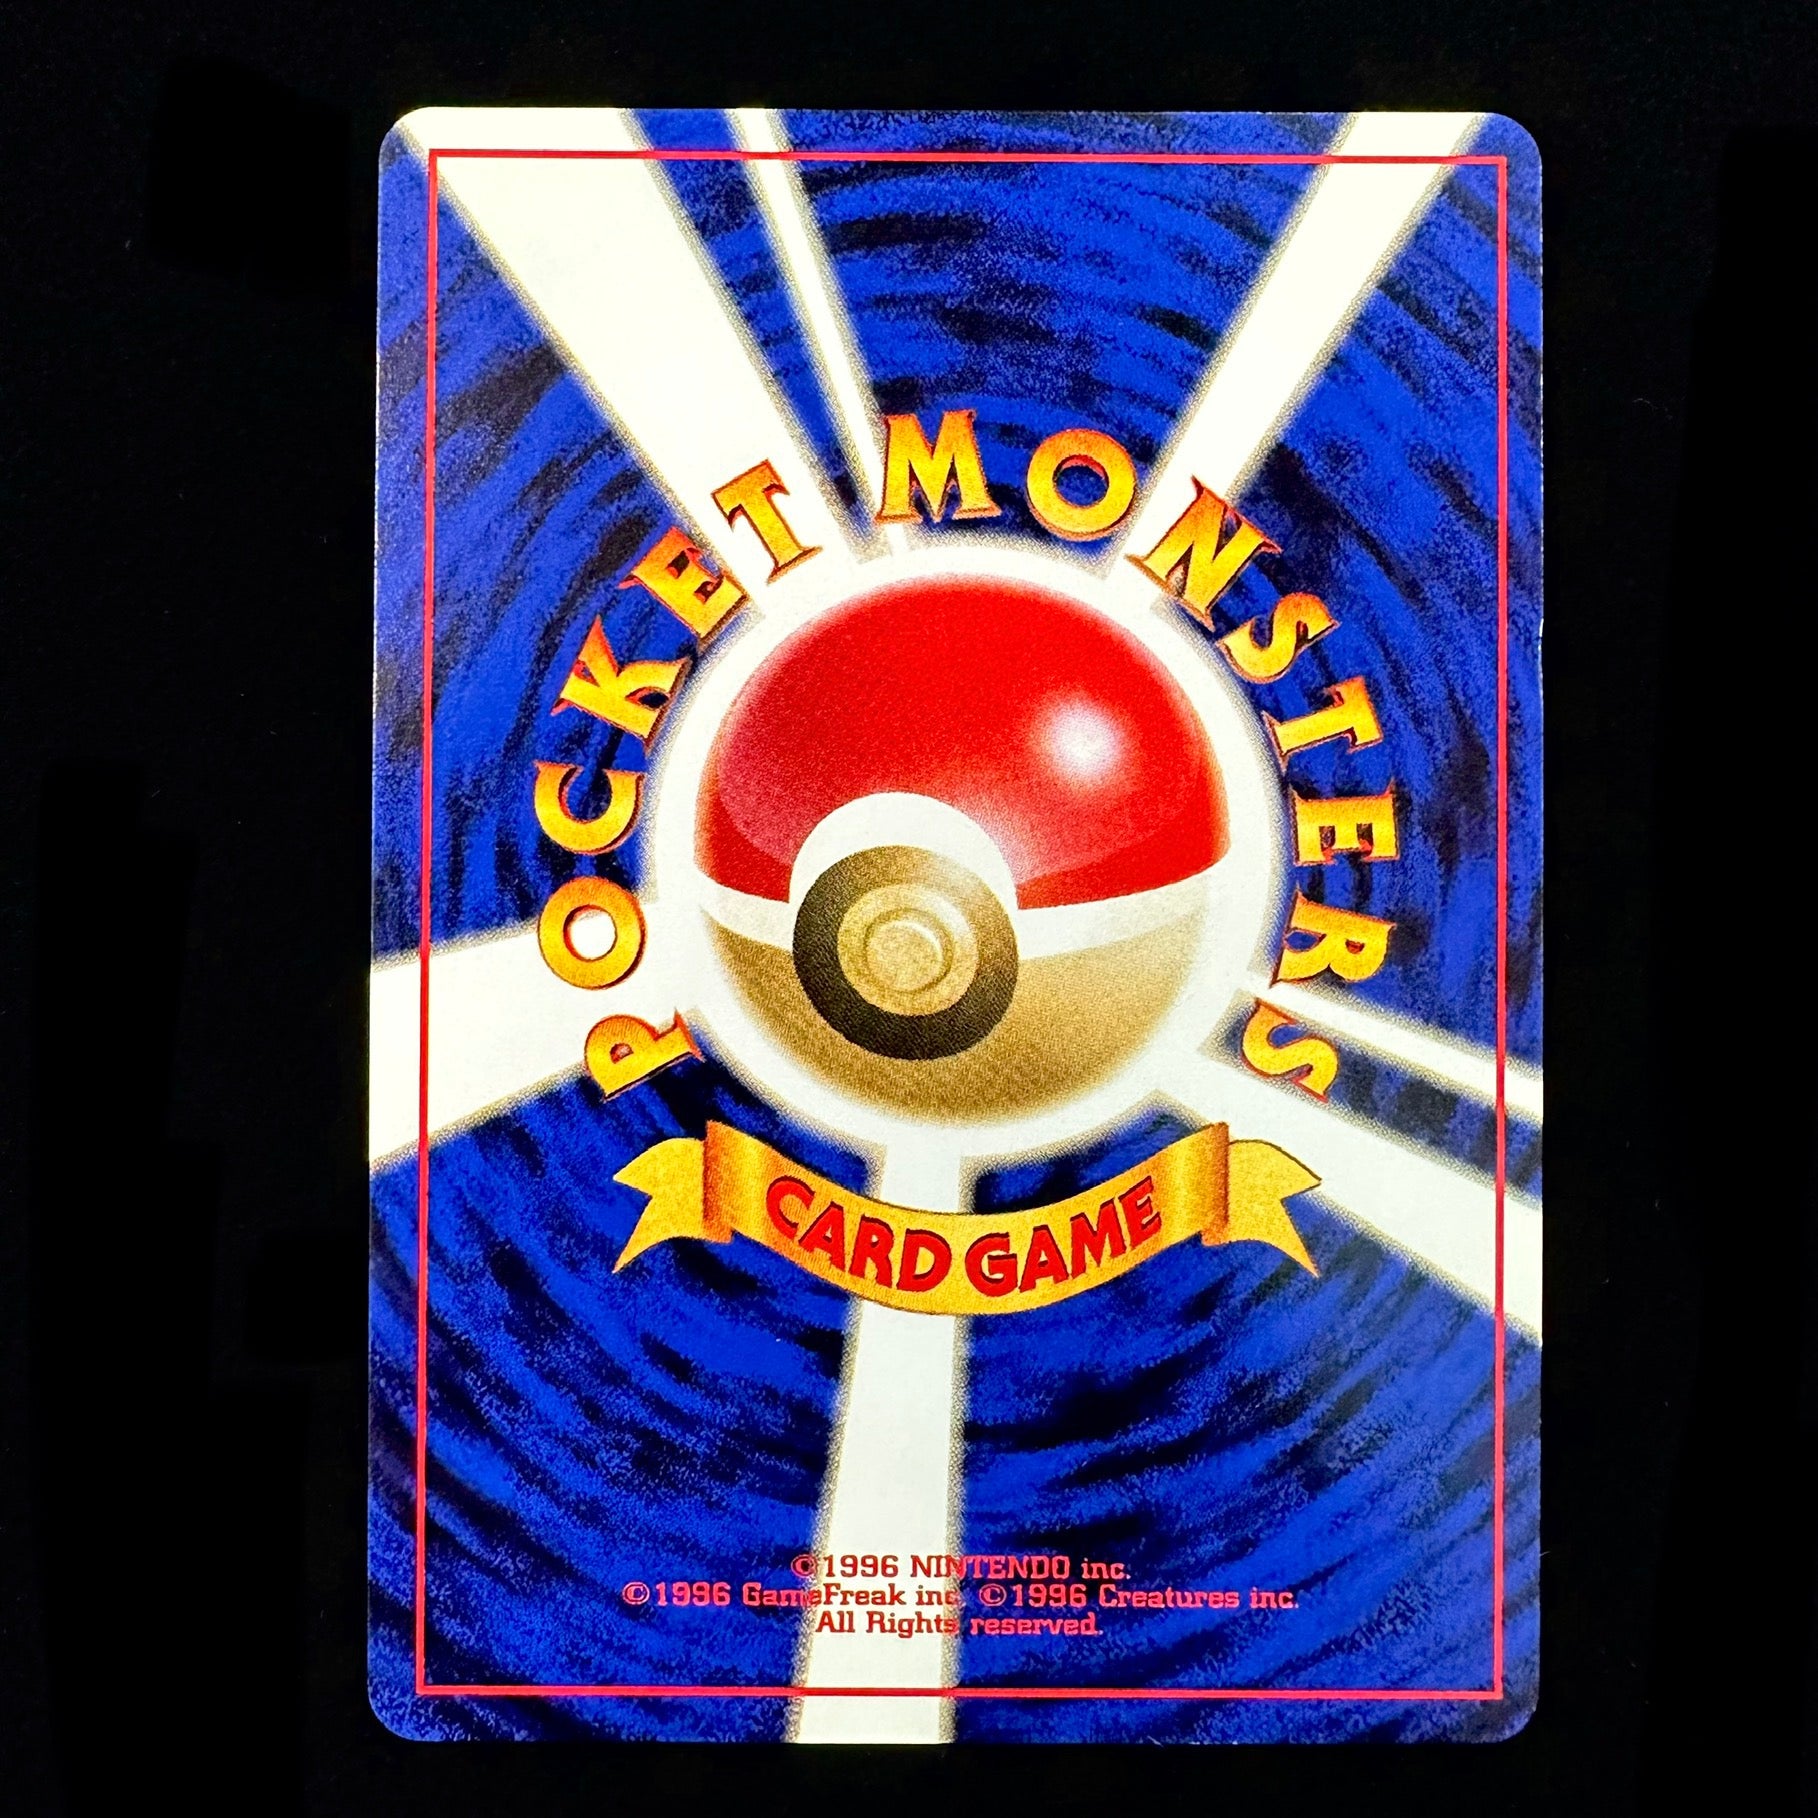 POCKET MONSTERS CARD GAME TRAINER - Neo